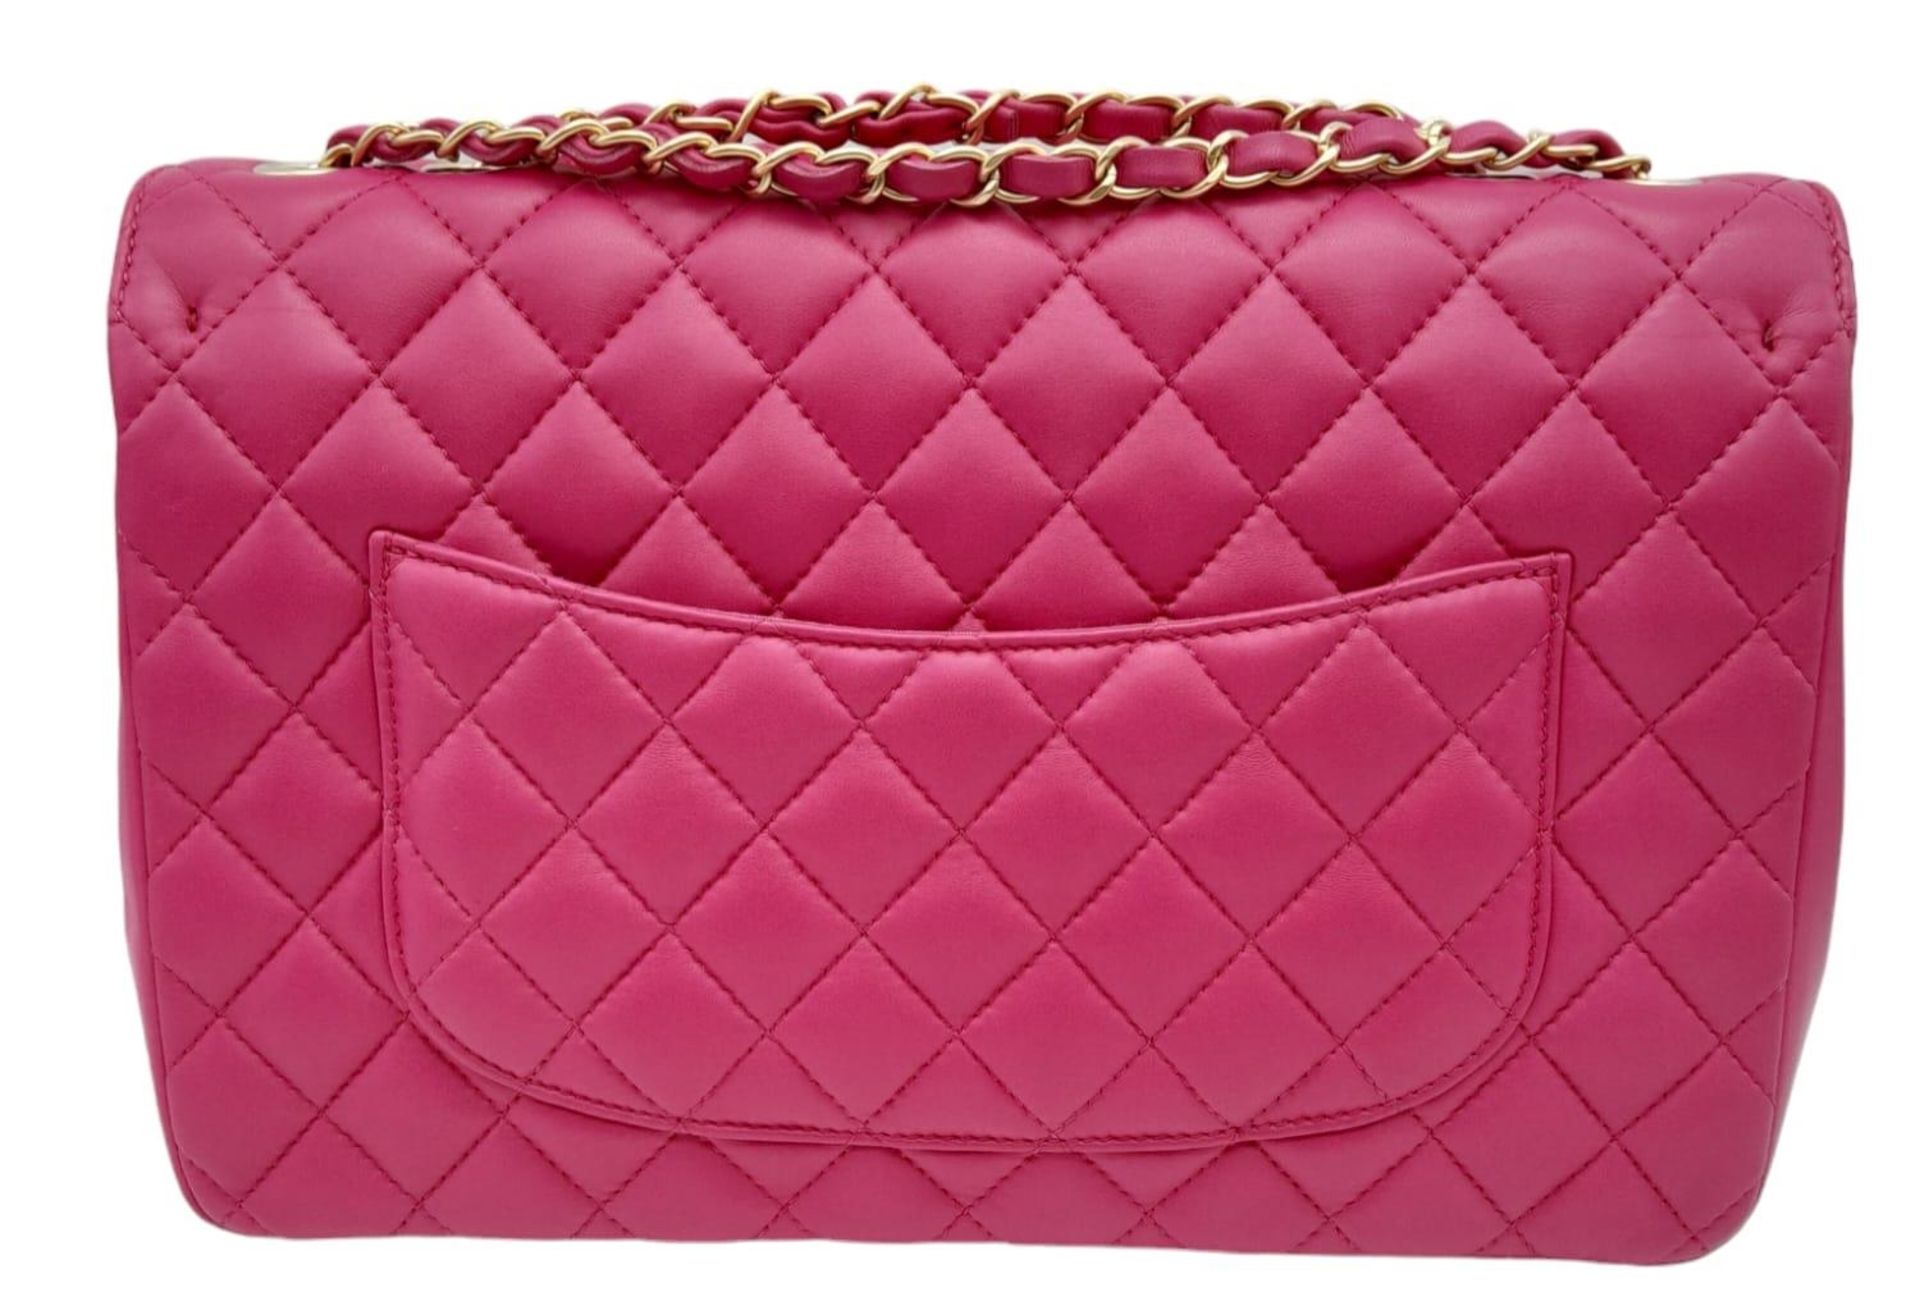 Chanel Mademoiselle Chic Flap Bag. Beautiful deep pink quilted lambskin leather with diamond - Bild 2 aus 14